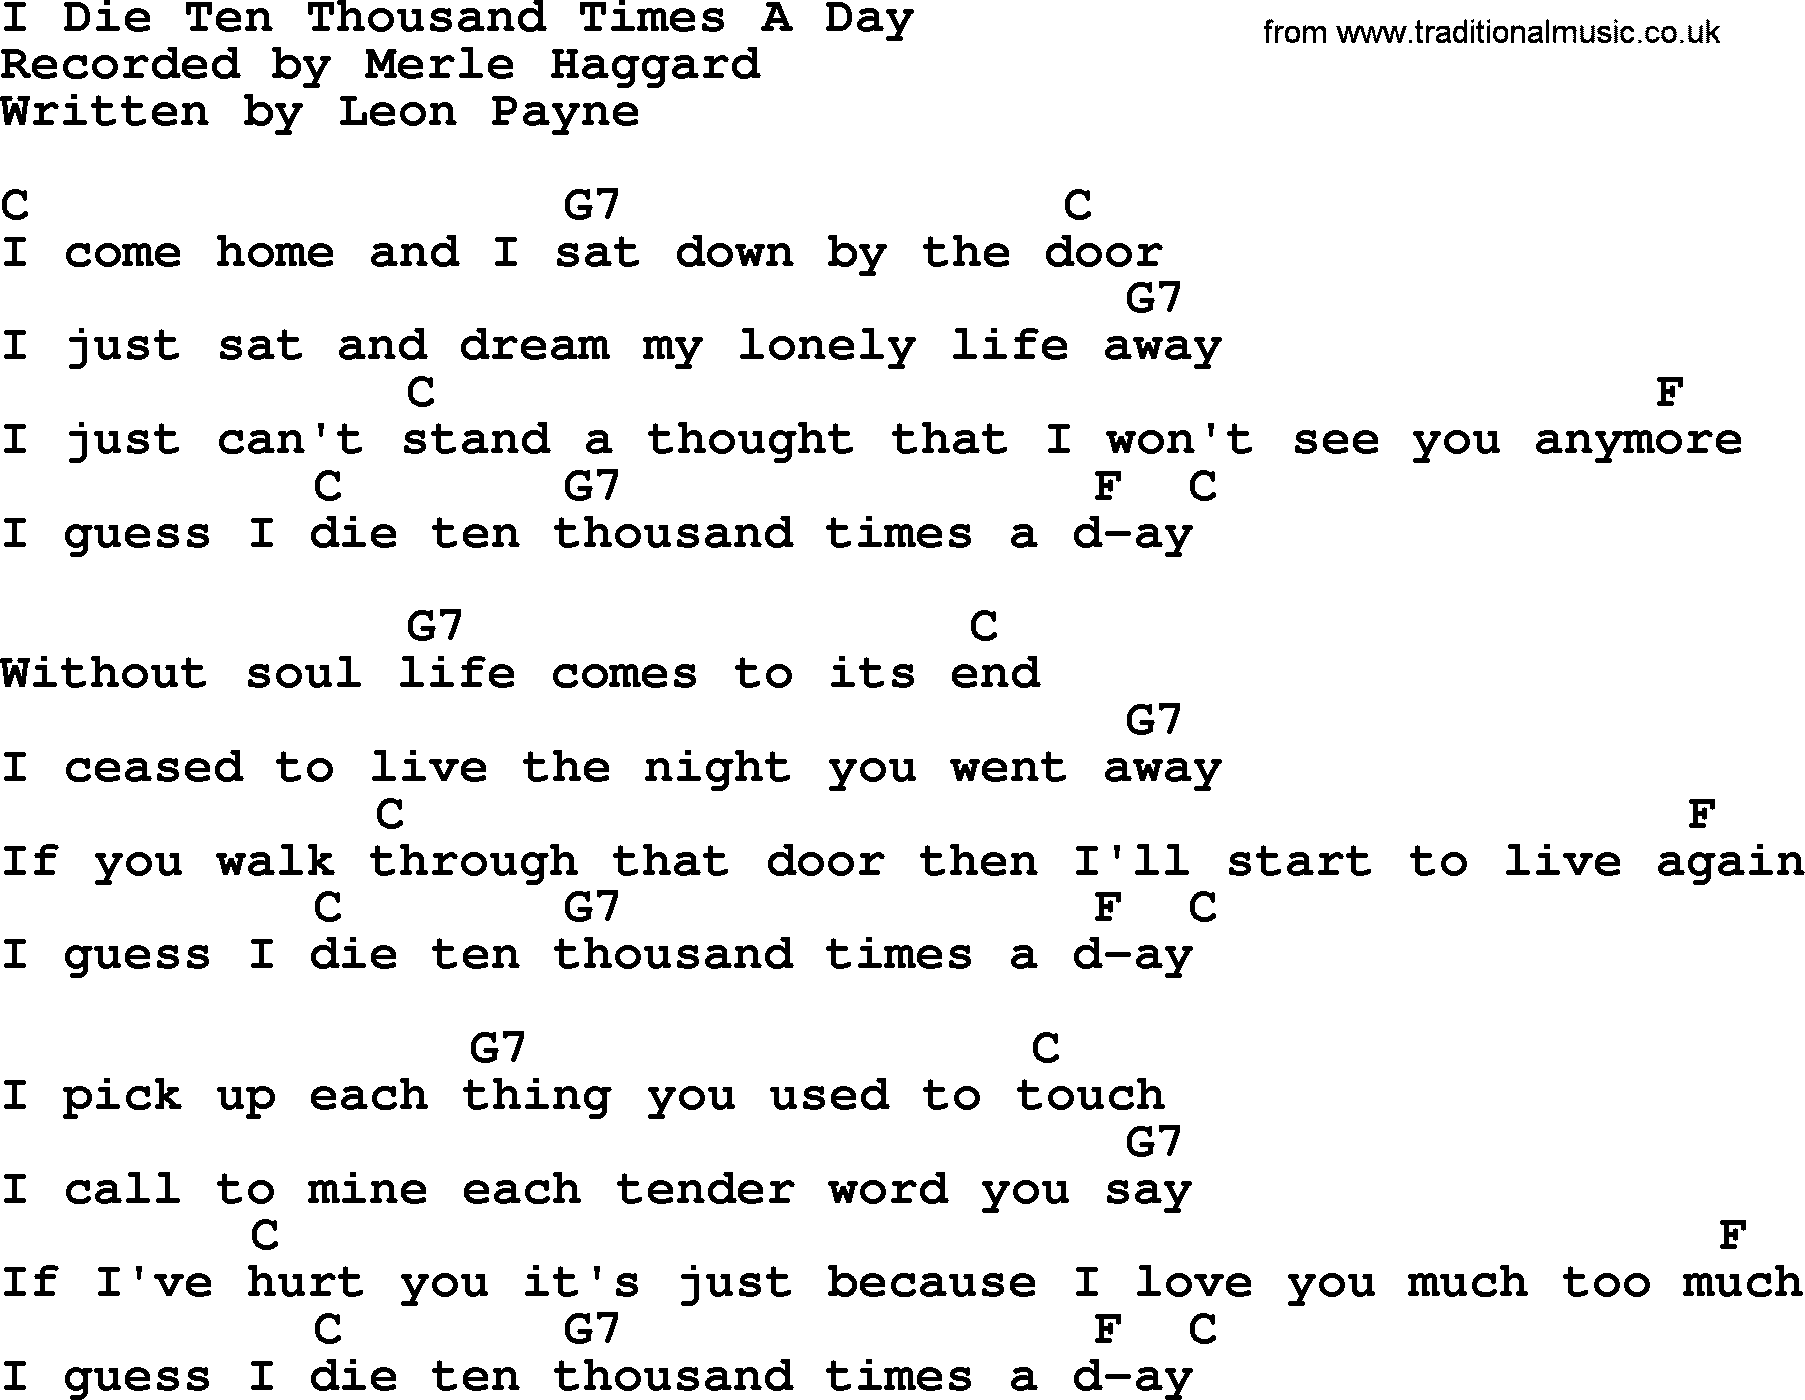 Merle Haggard song: I Die Ten Thousand Times A Day, lyrics and chords